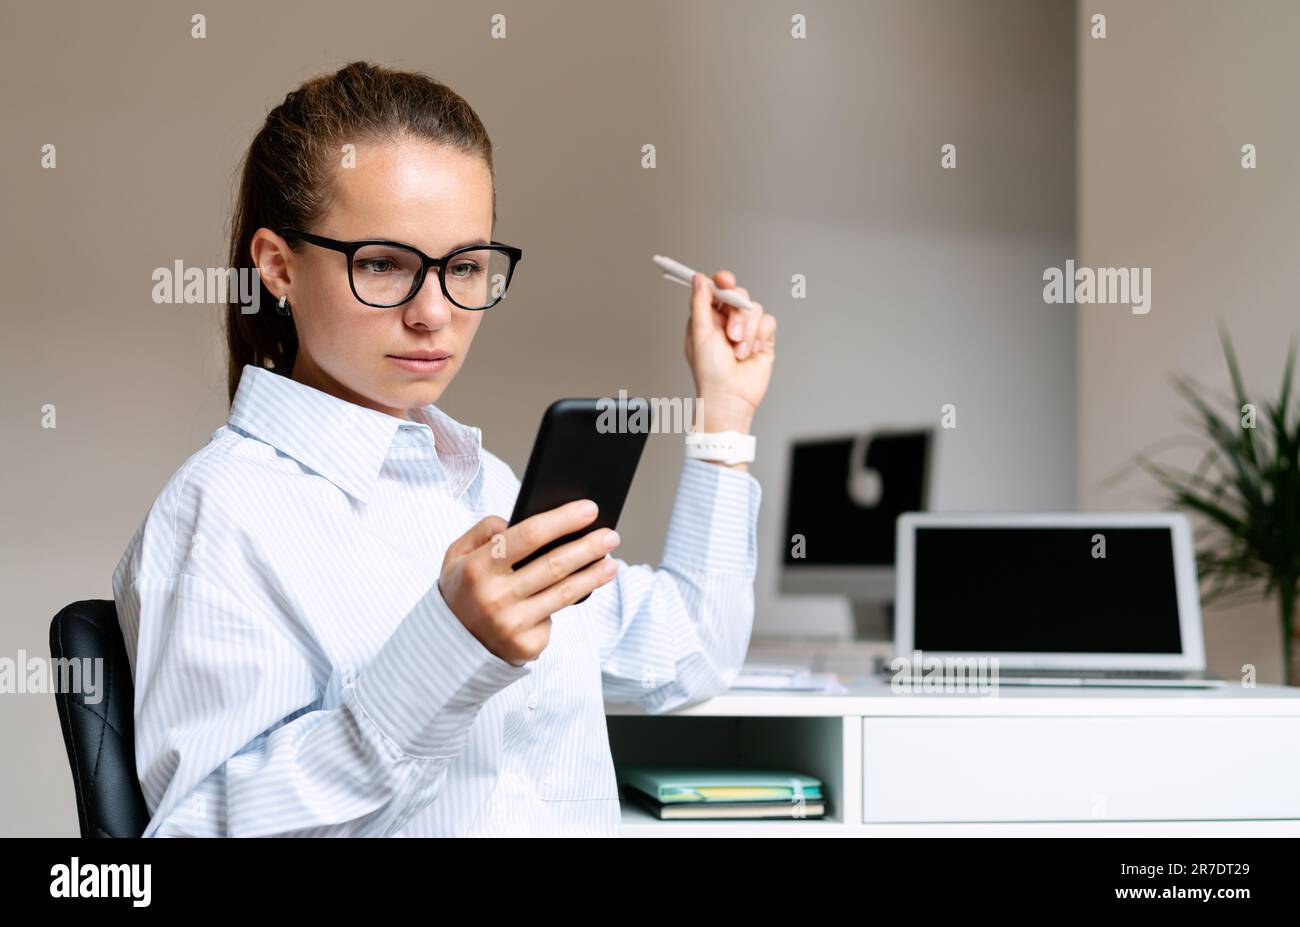 Serious young businesswoman wearing glasses sitting at the desk in her own office space and using her smart phone. Stock Photo